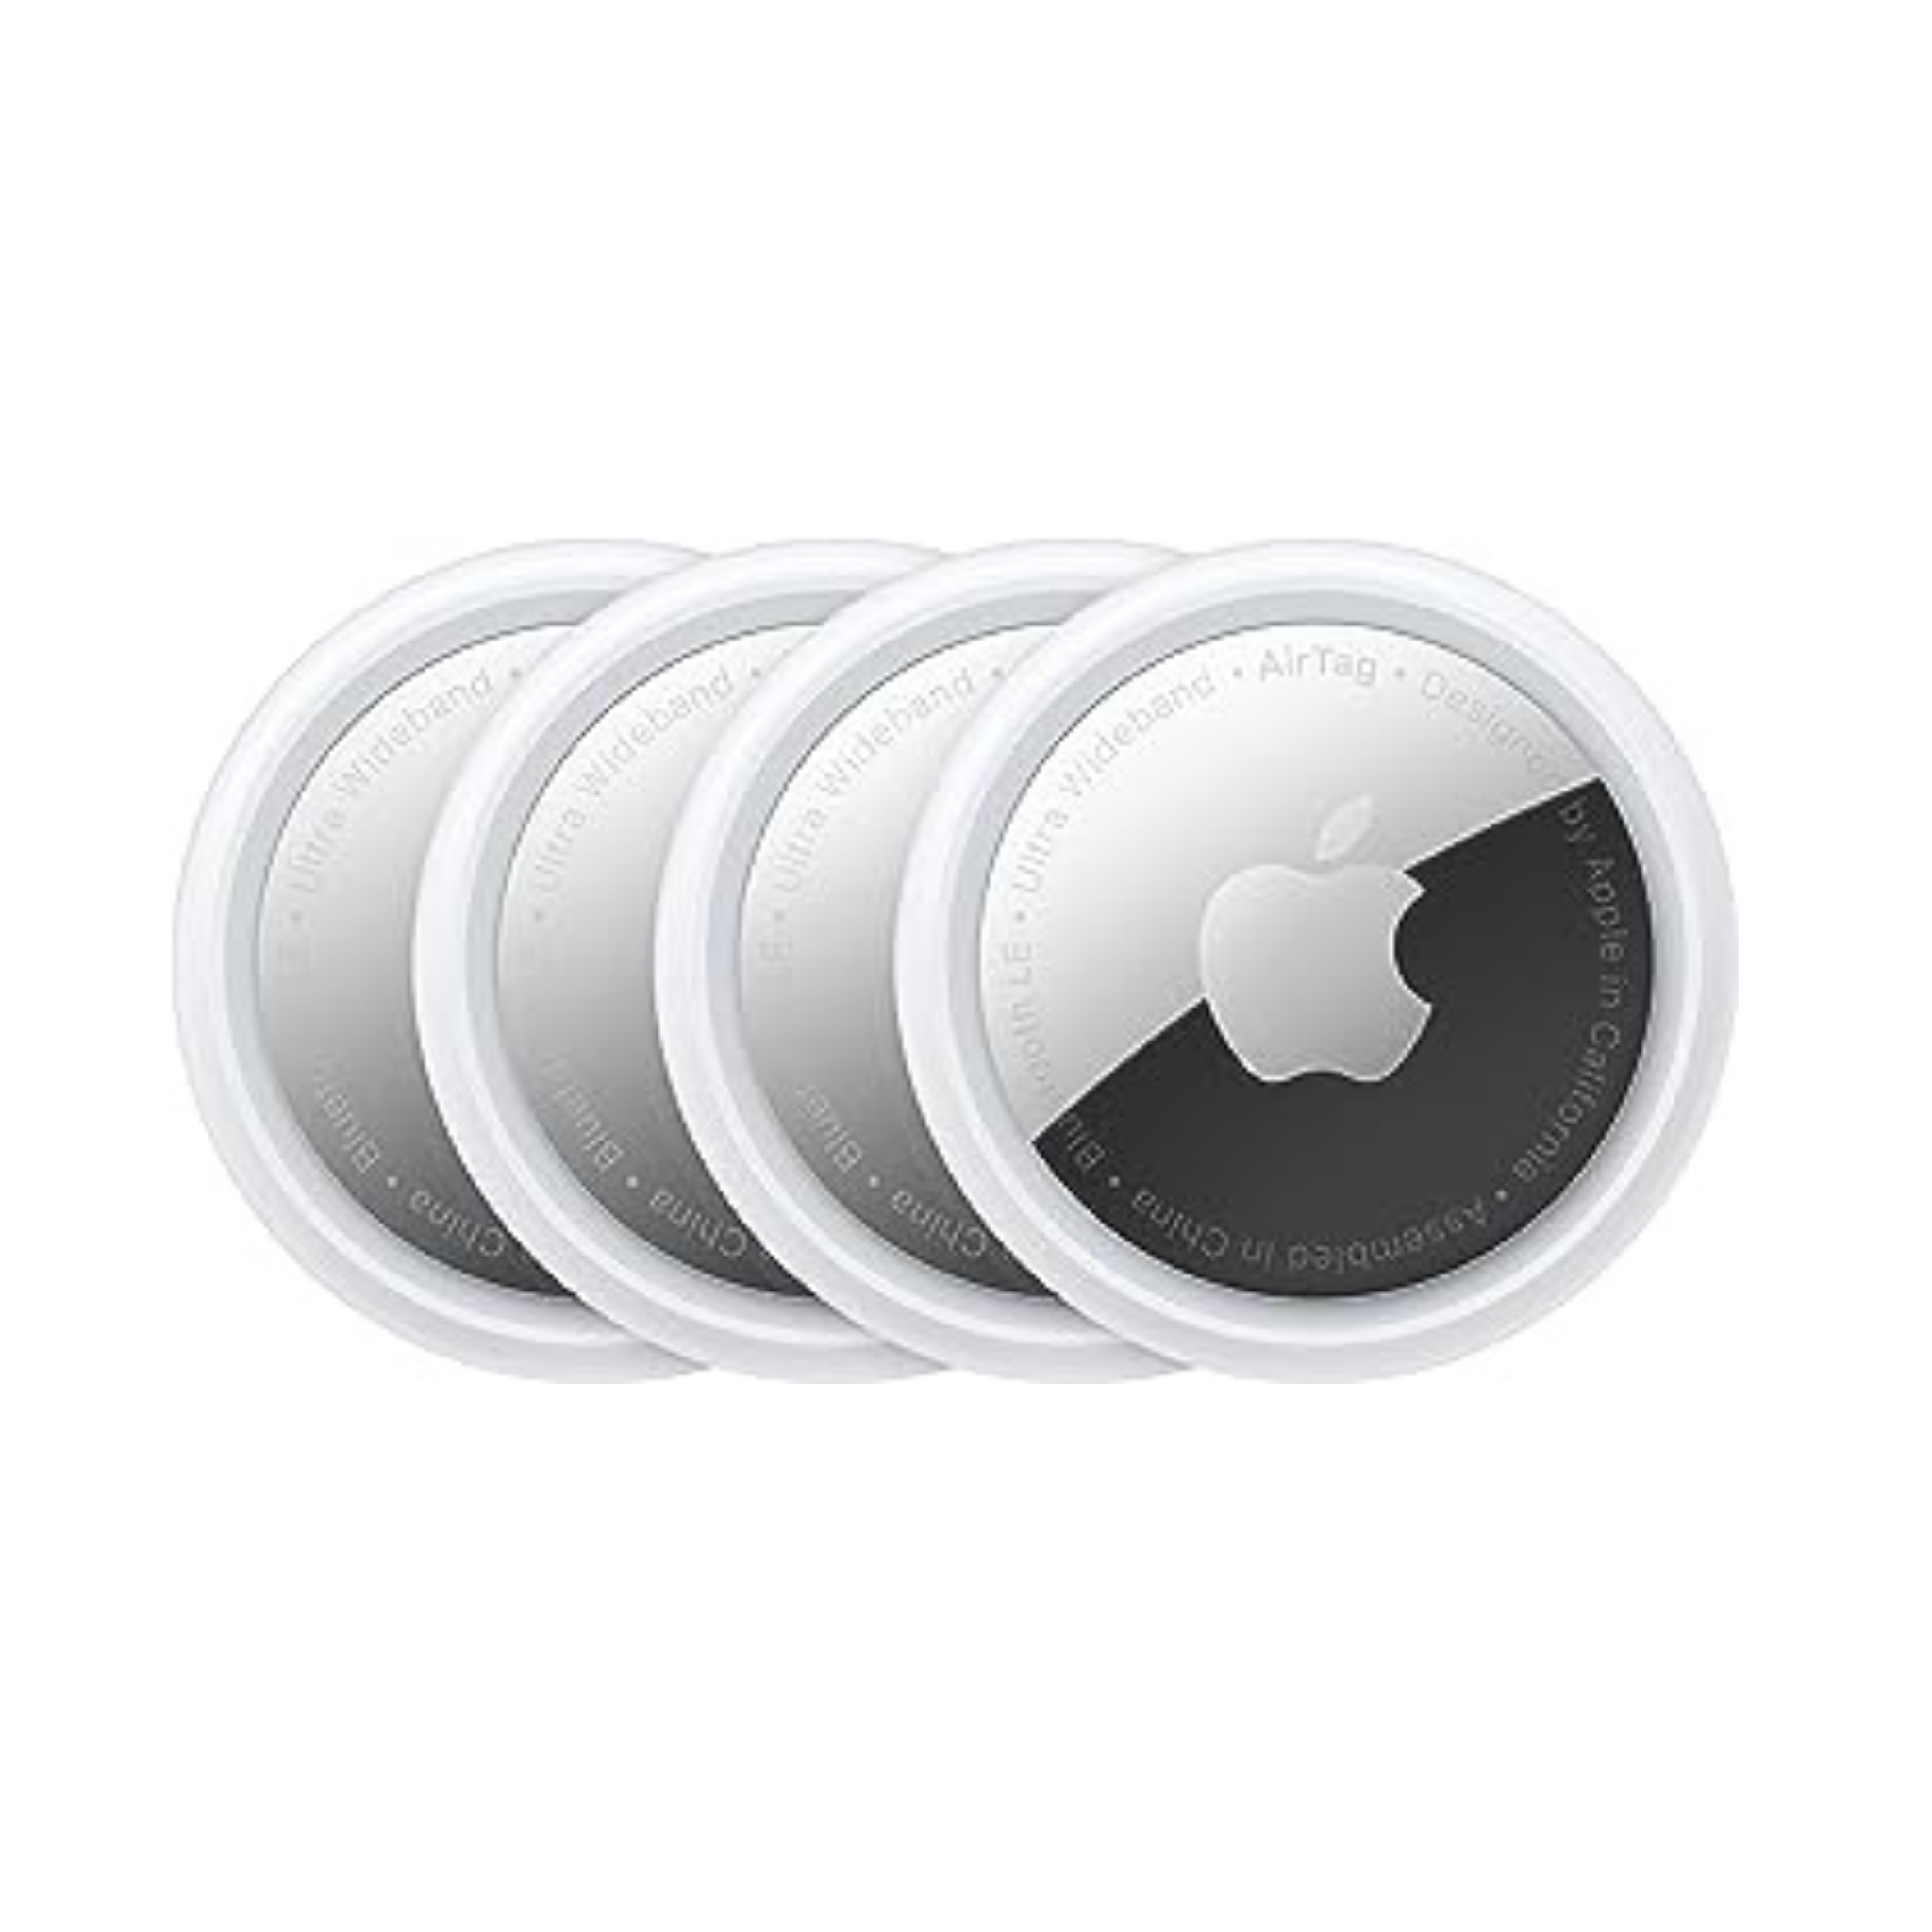 4-Pack Apple AirTags Bluetooth Tracking Device